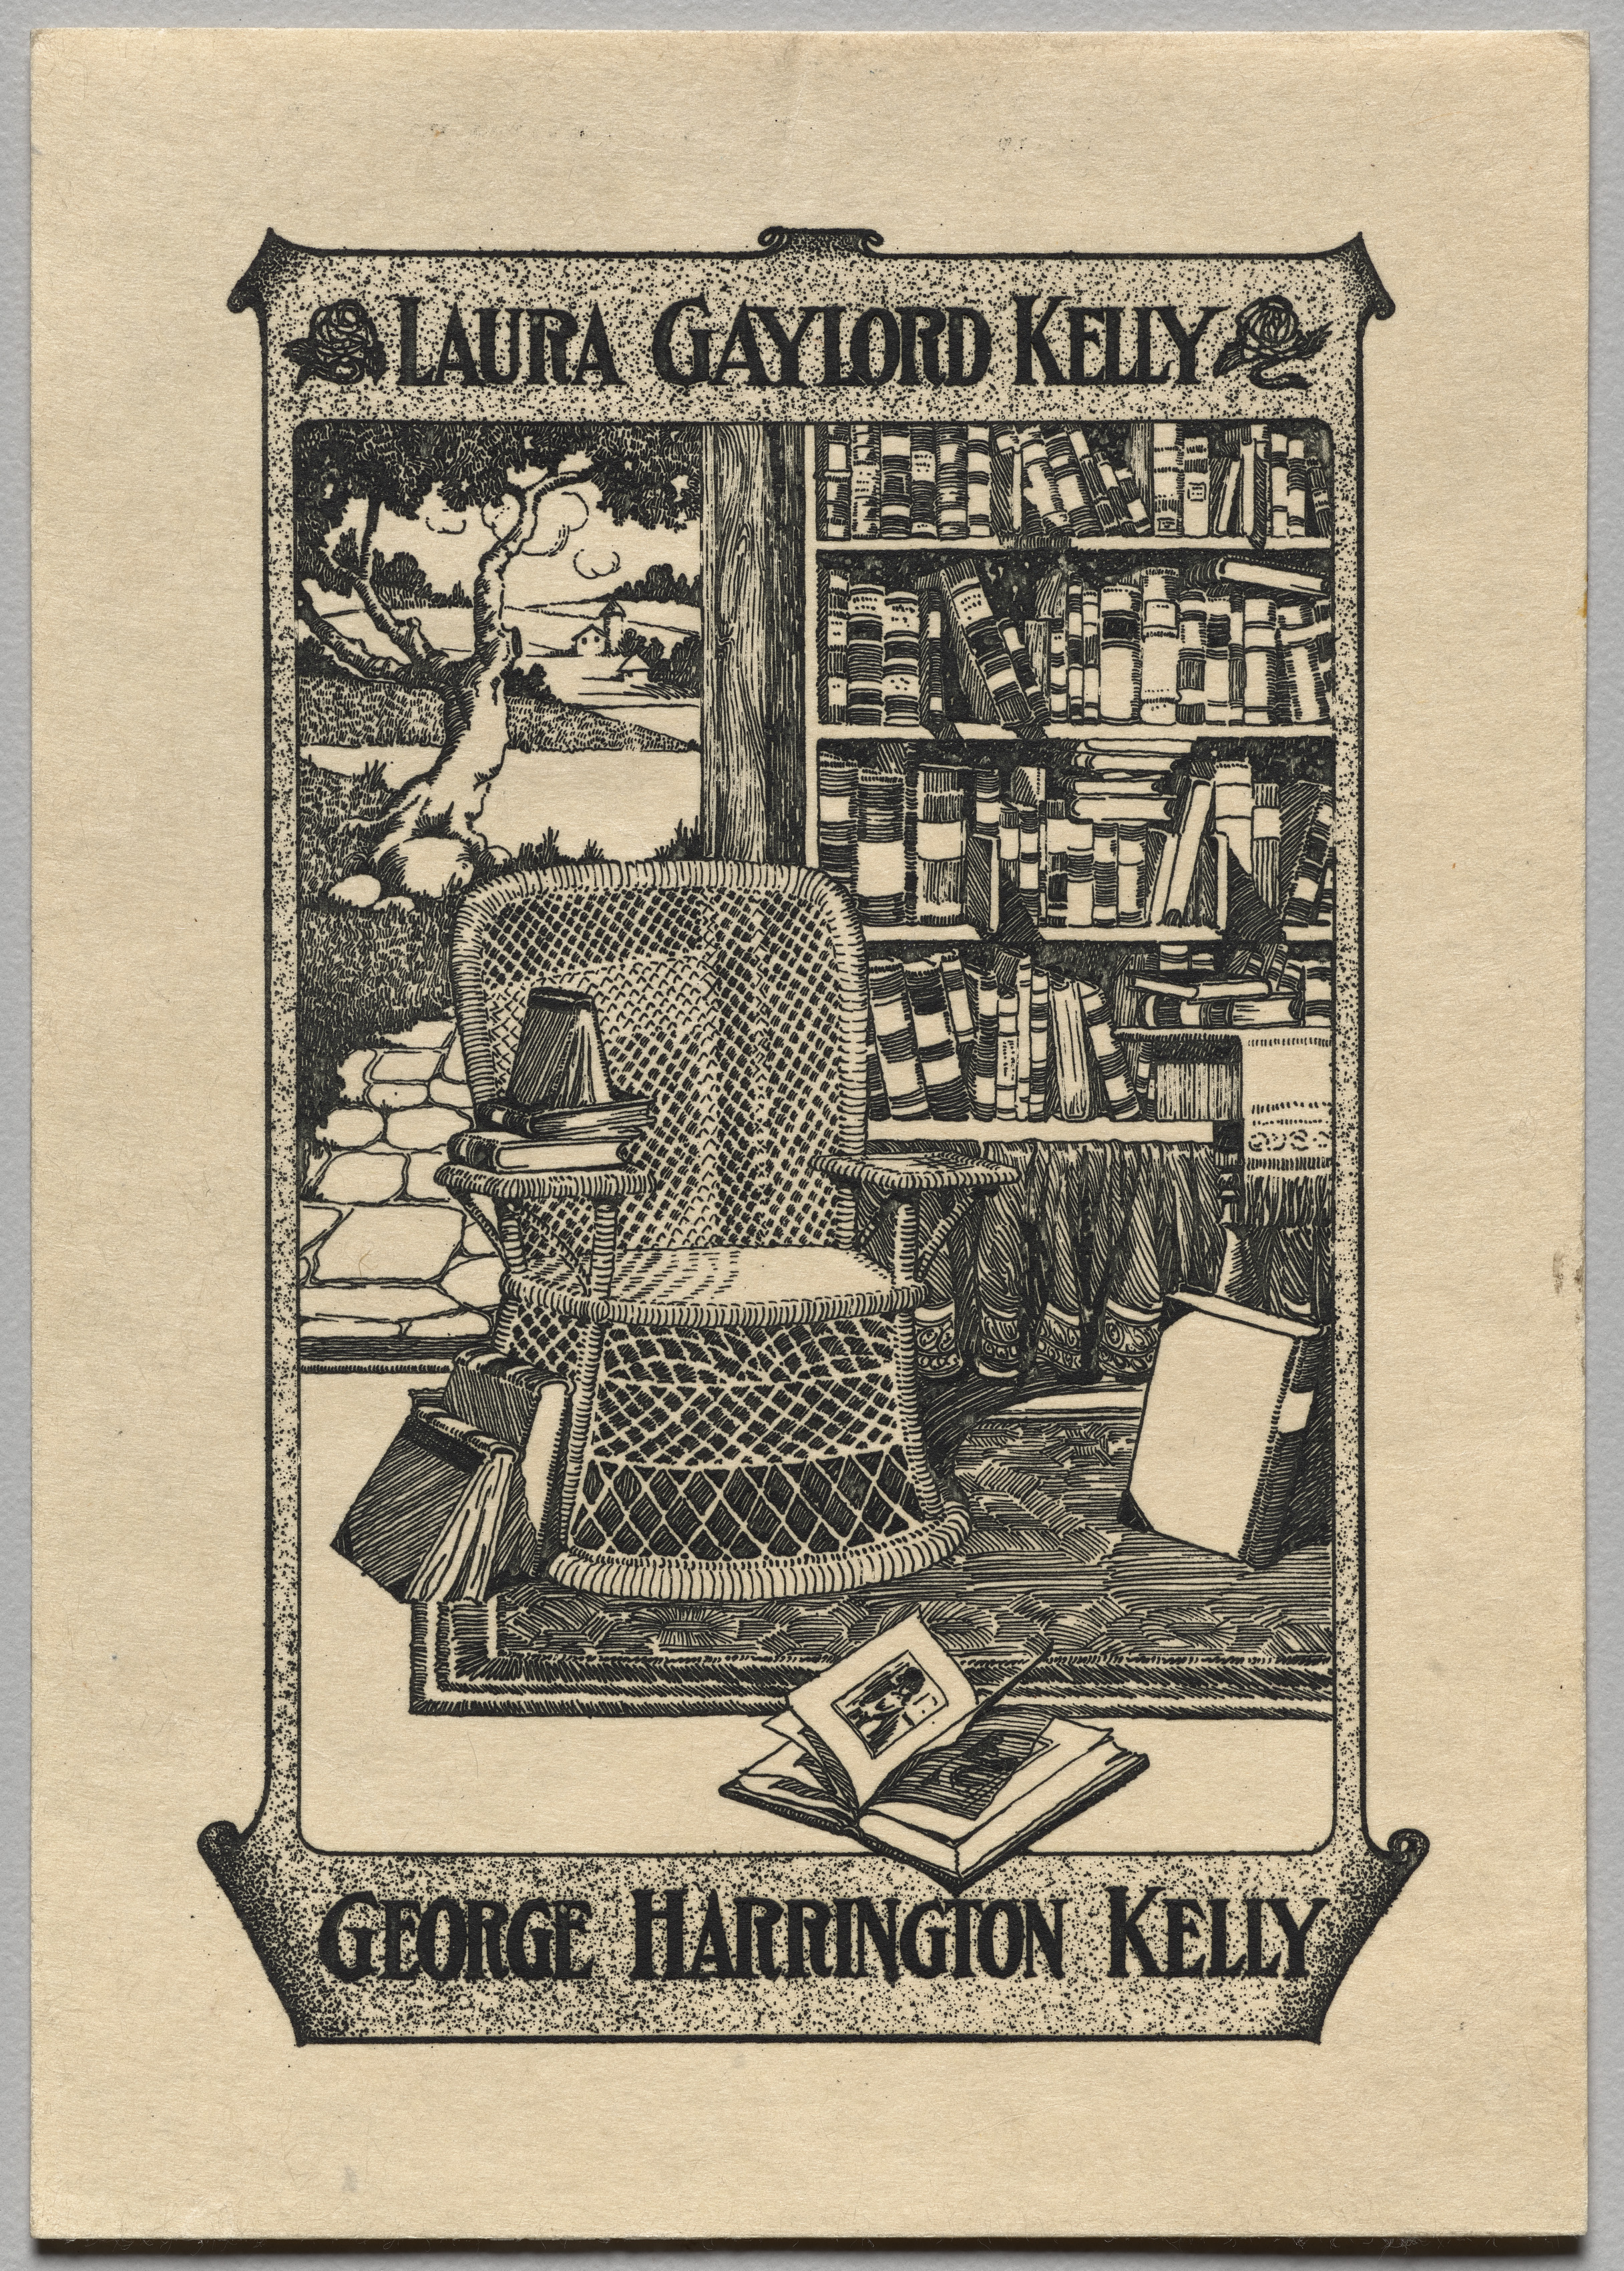 Bookplate: George Harrington Kelly and Laura Gaylord Kelly